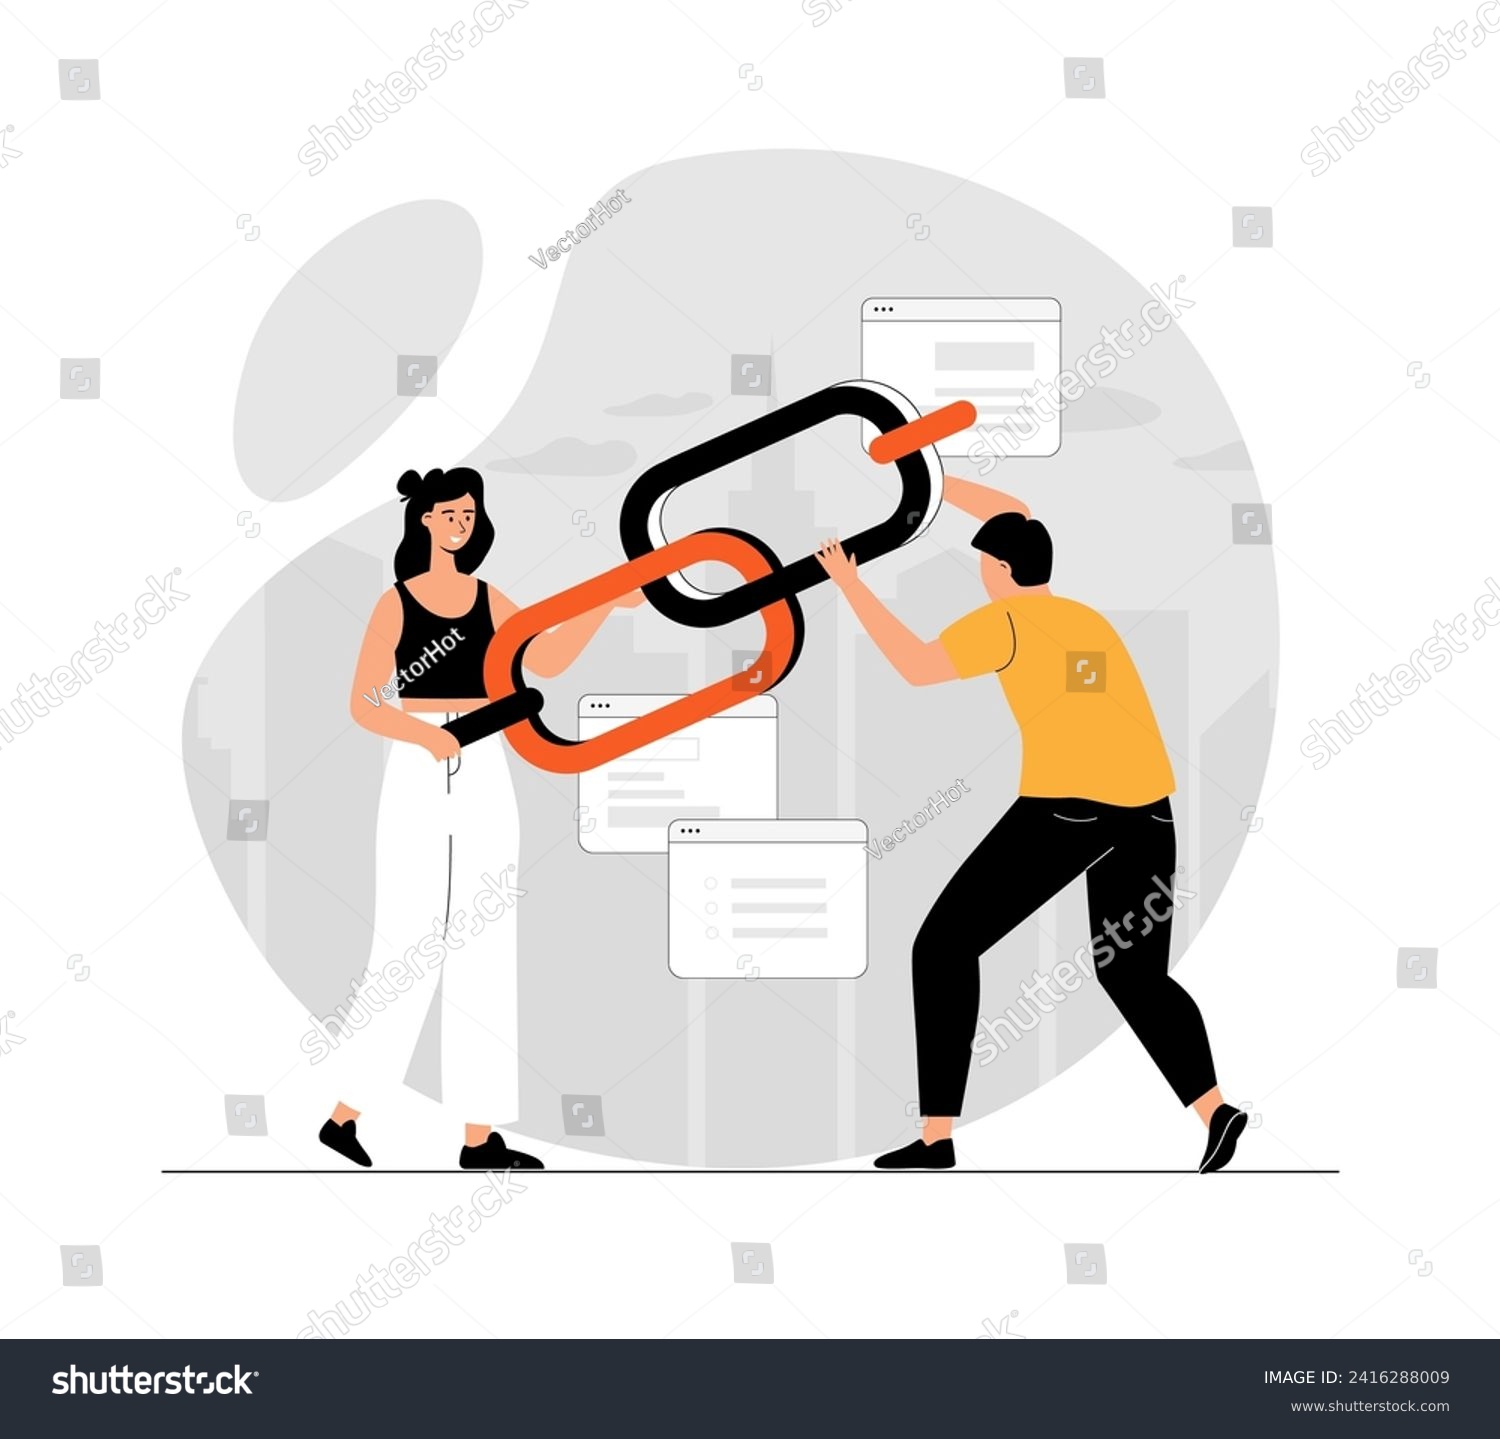 SVG of Link building concept. Search engine optimization, SEO. People holding chain on bowser windows. Illustration with people scene in flat design for website and mobile development.	
 svg